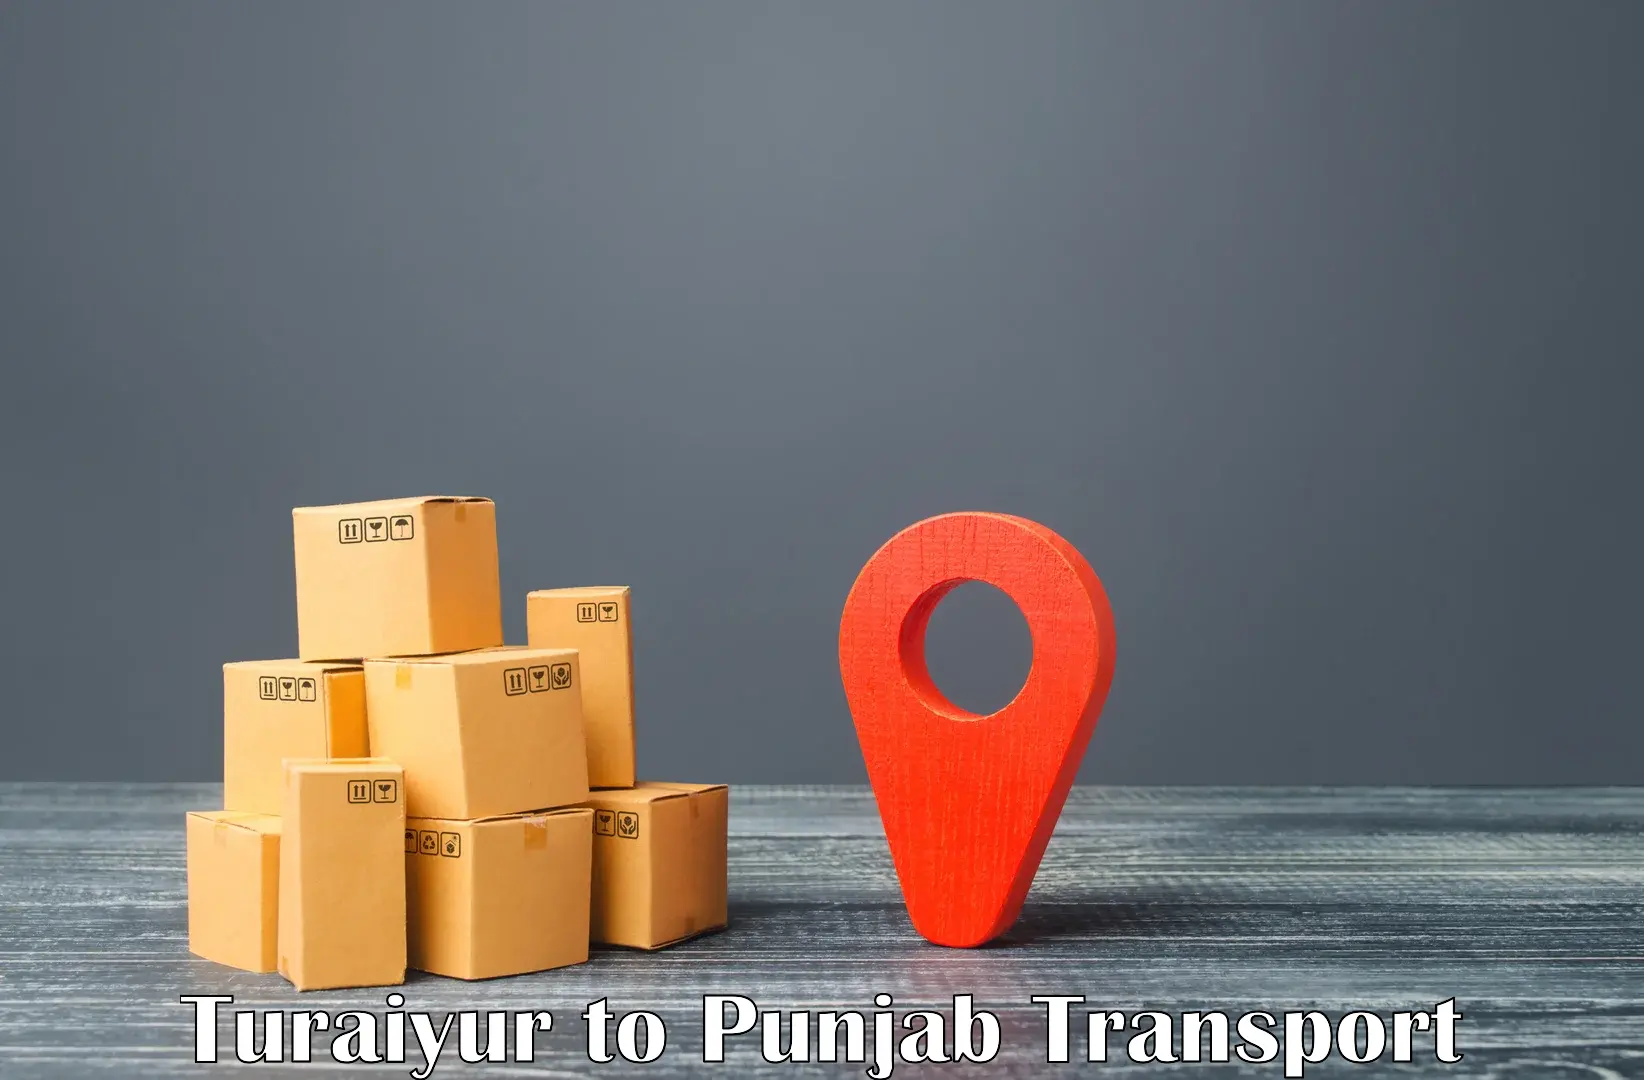 Nearby transport service in Turaiyur to Punjab